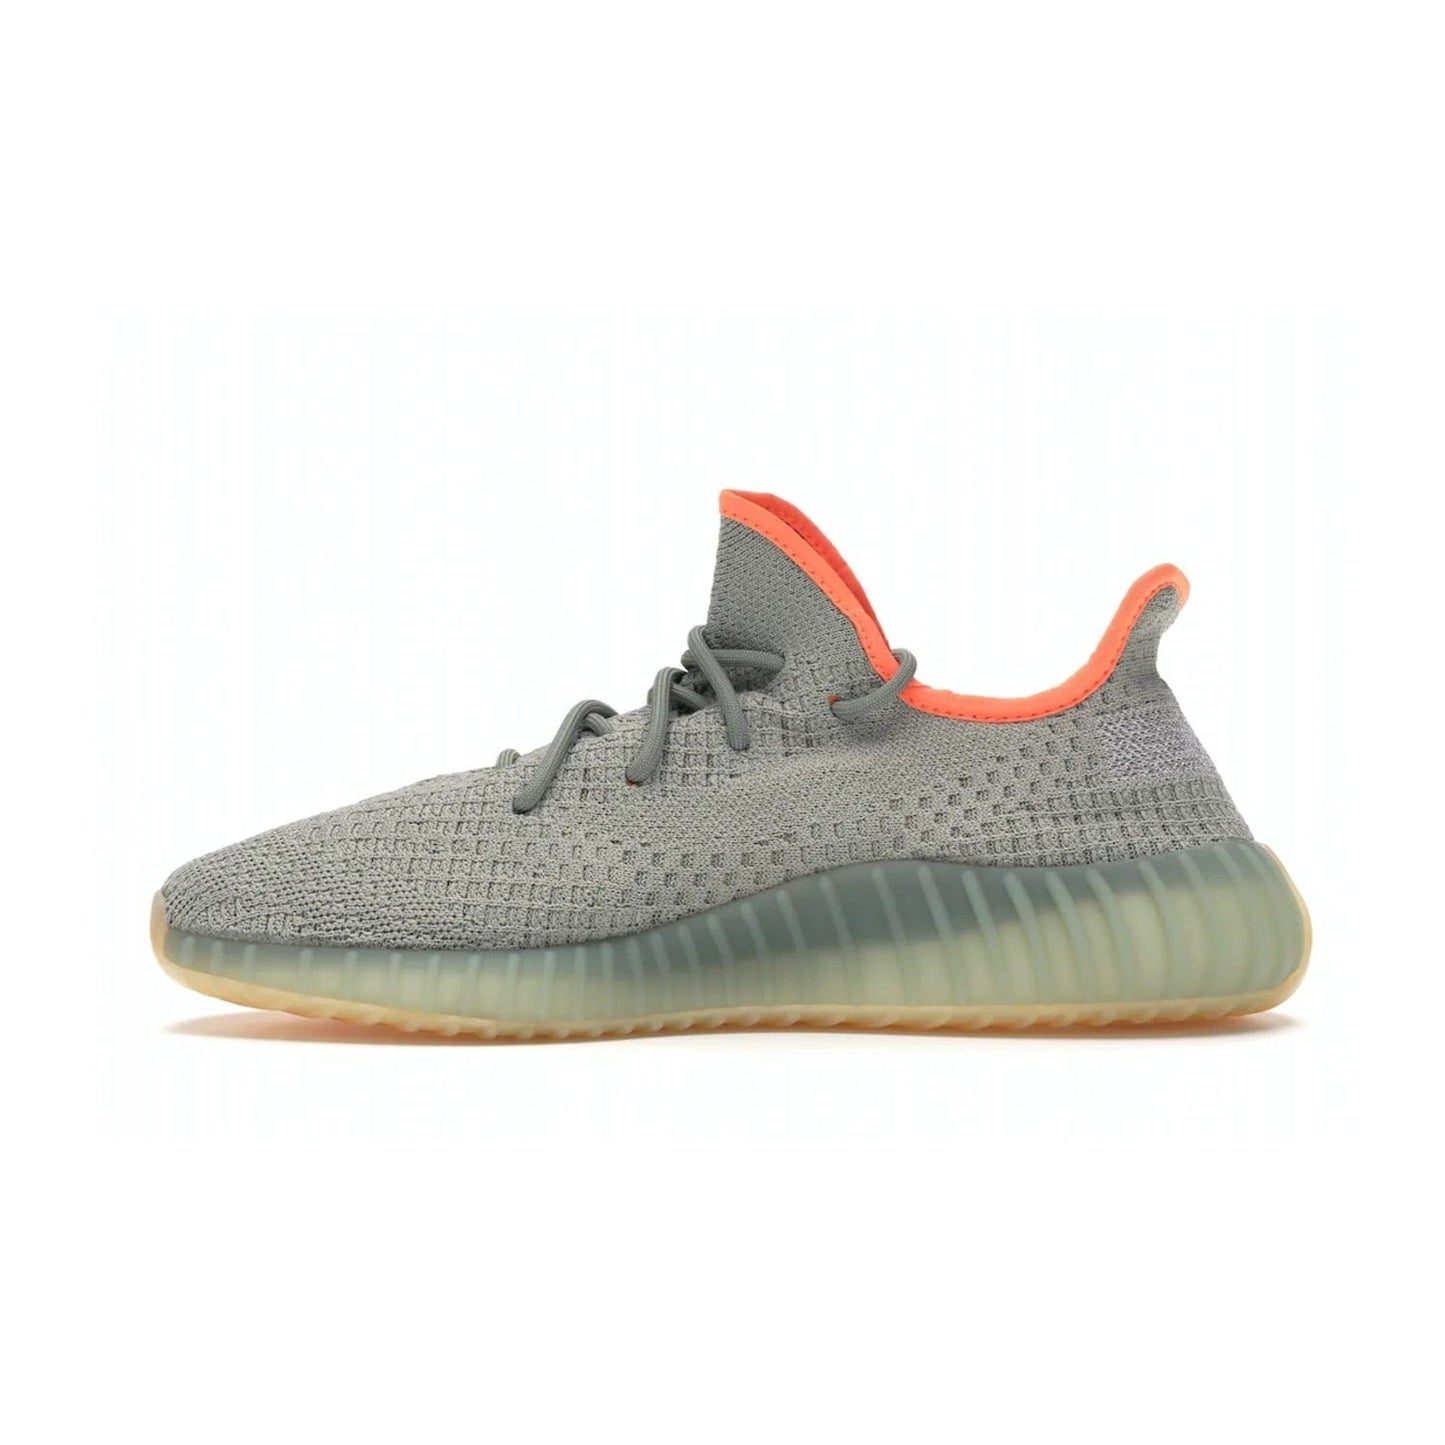 adidas Yeezy Boost 350 V2 Desert Sage - Image 19 - Only at www.BallersClubKickz.com - Upgrade your style with the adidas Yeezy Boost 350 V2 Desert Sage. This 350V2 features a Desert Sage primeknit upper with tonal side stripe, and an orange-highlighted translucent Boost cushioning sole. Stay on-trend in effortless style.